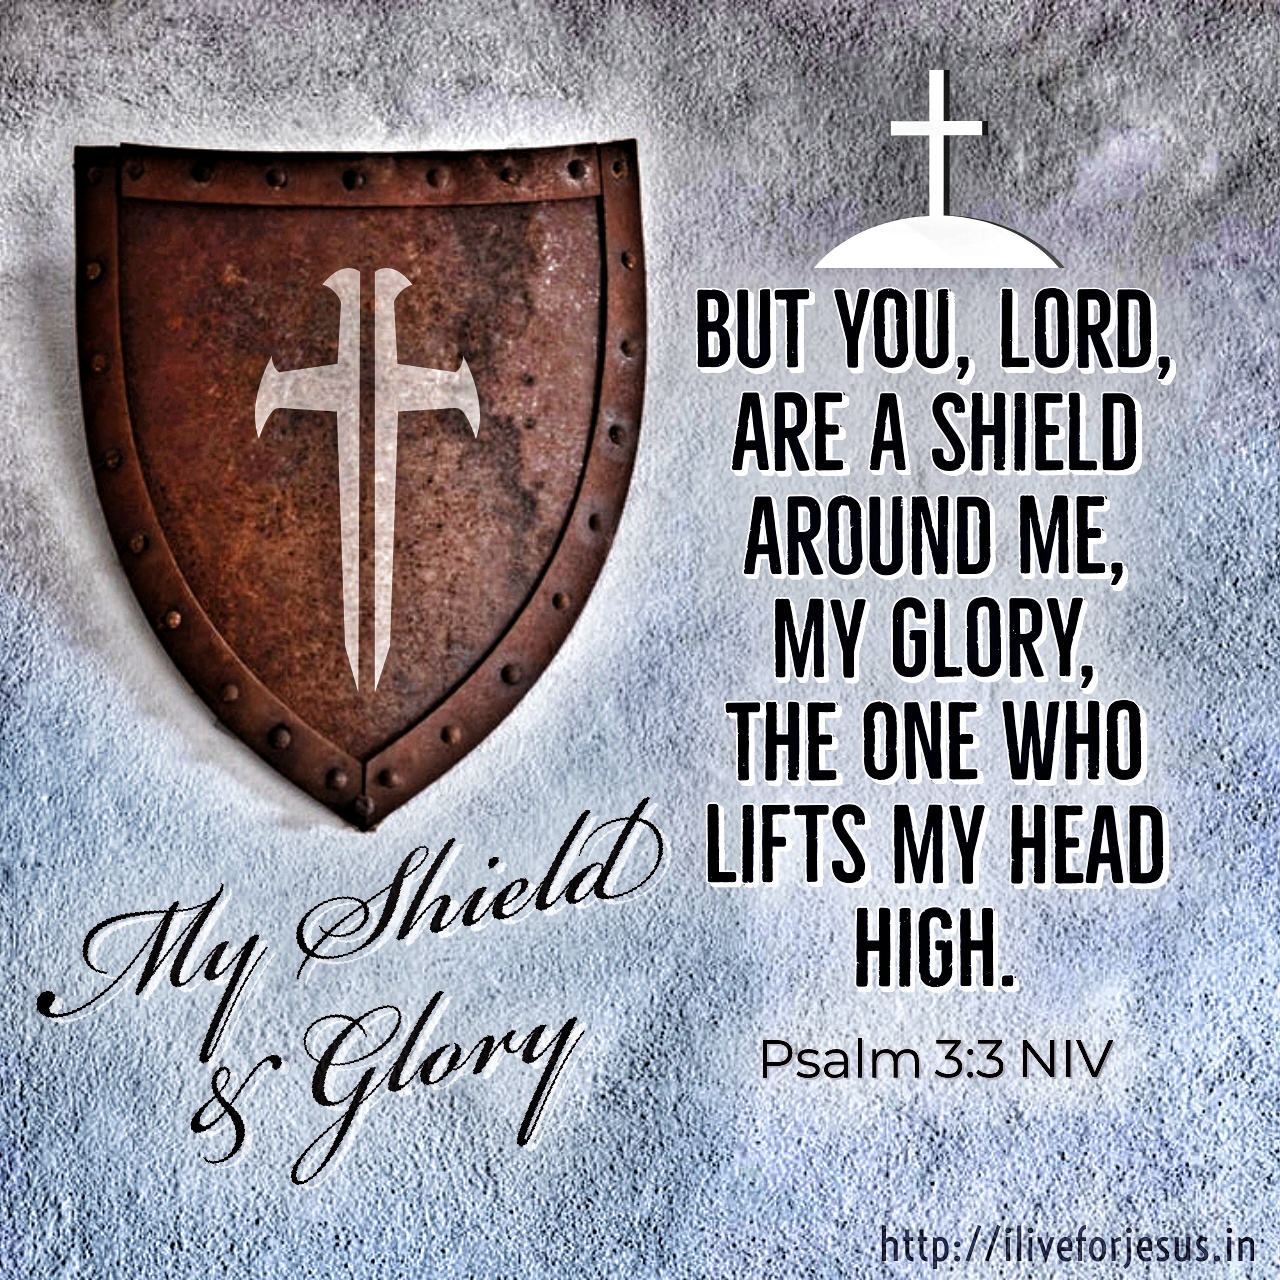 But you, Lord , are a shield around me, my glory, the One who lifts my head high. Psalm 3:3 NIV